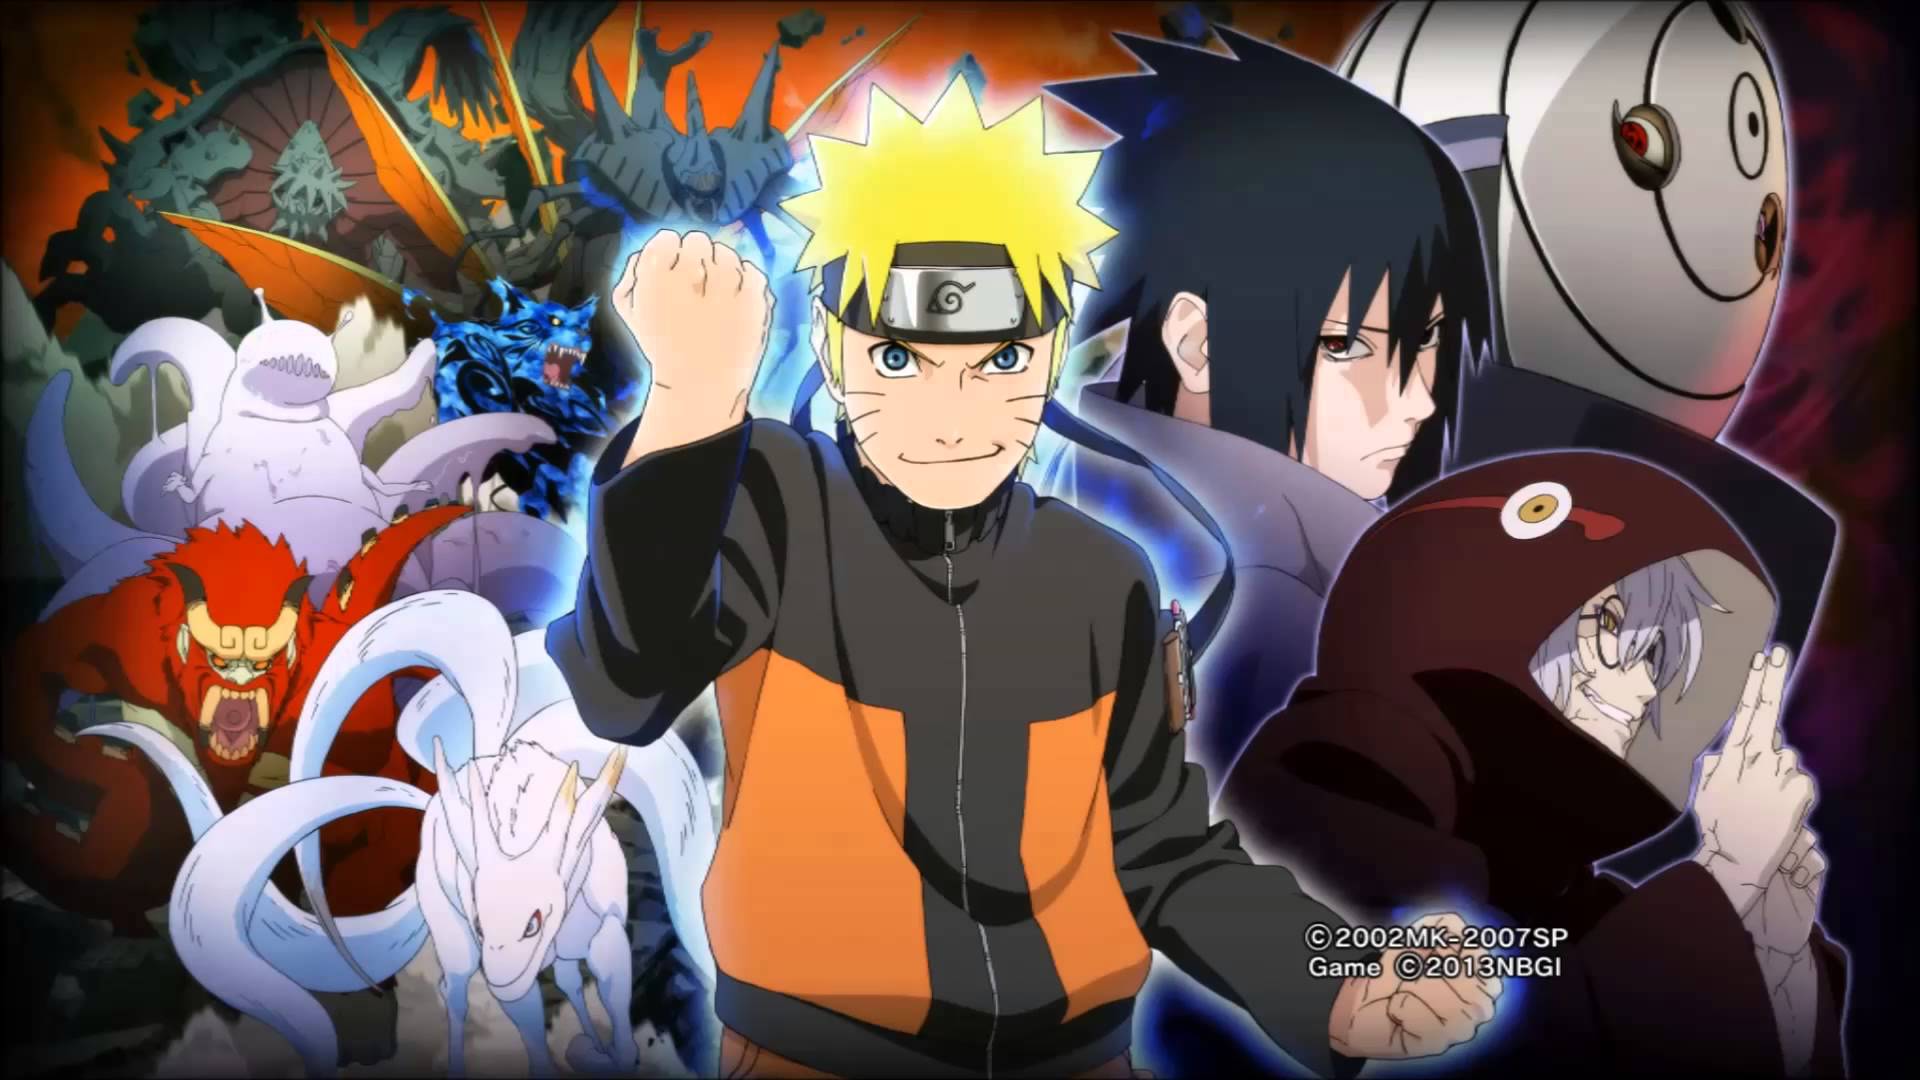 Wallpapers De Naruto, High Quality Images of Naruto in Best